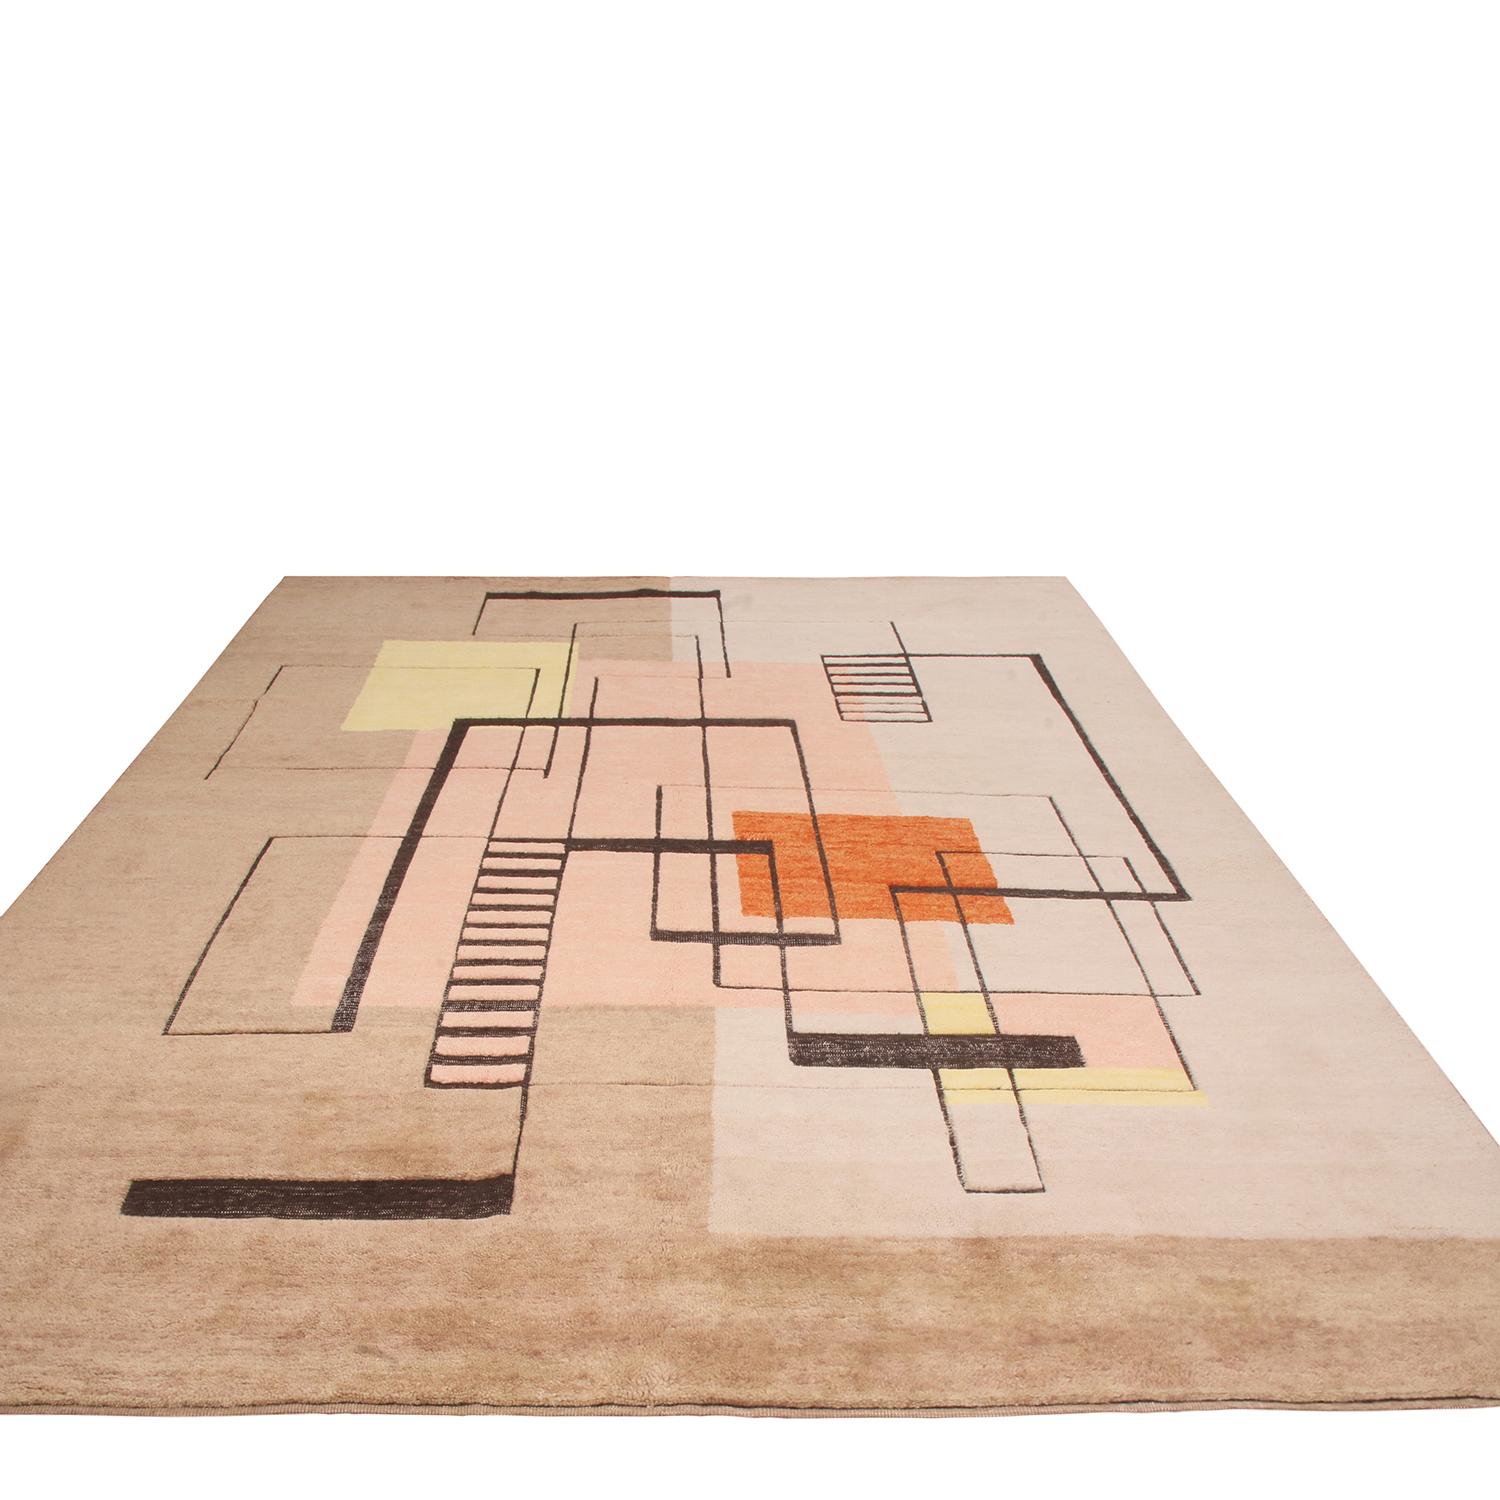  Hand knotted in high-quality wool pile accenting the field design, this geometric rug hails from the latest additions to the Mid-Century Modern collection by Rug & Kilim, refined over four years perfecting a new approach to unique large-scale